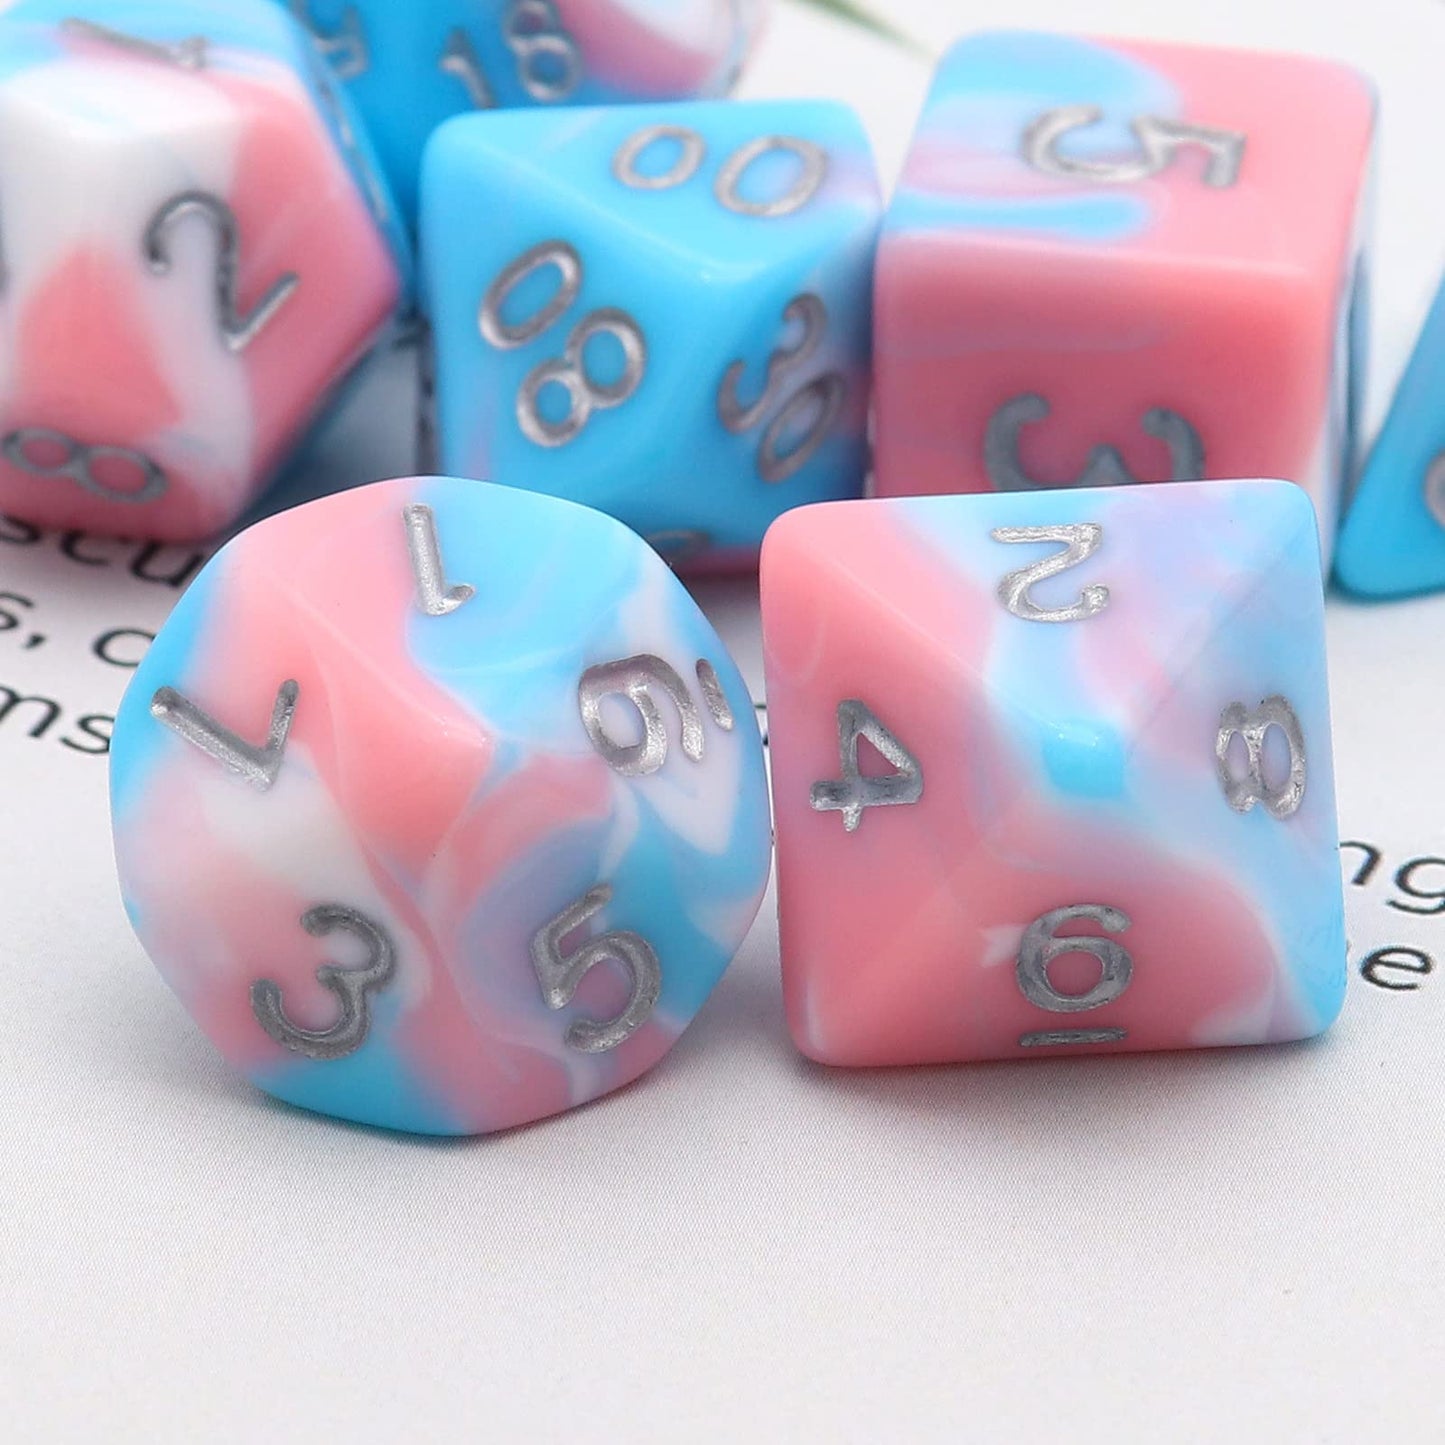 FREE Today: Dazed and Dreamy Dice Set